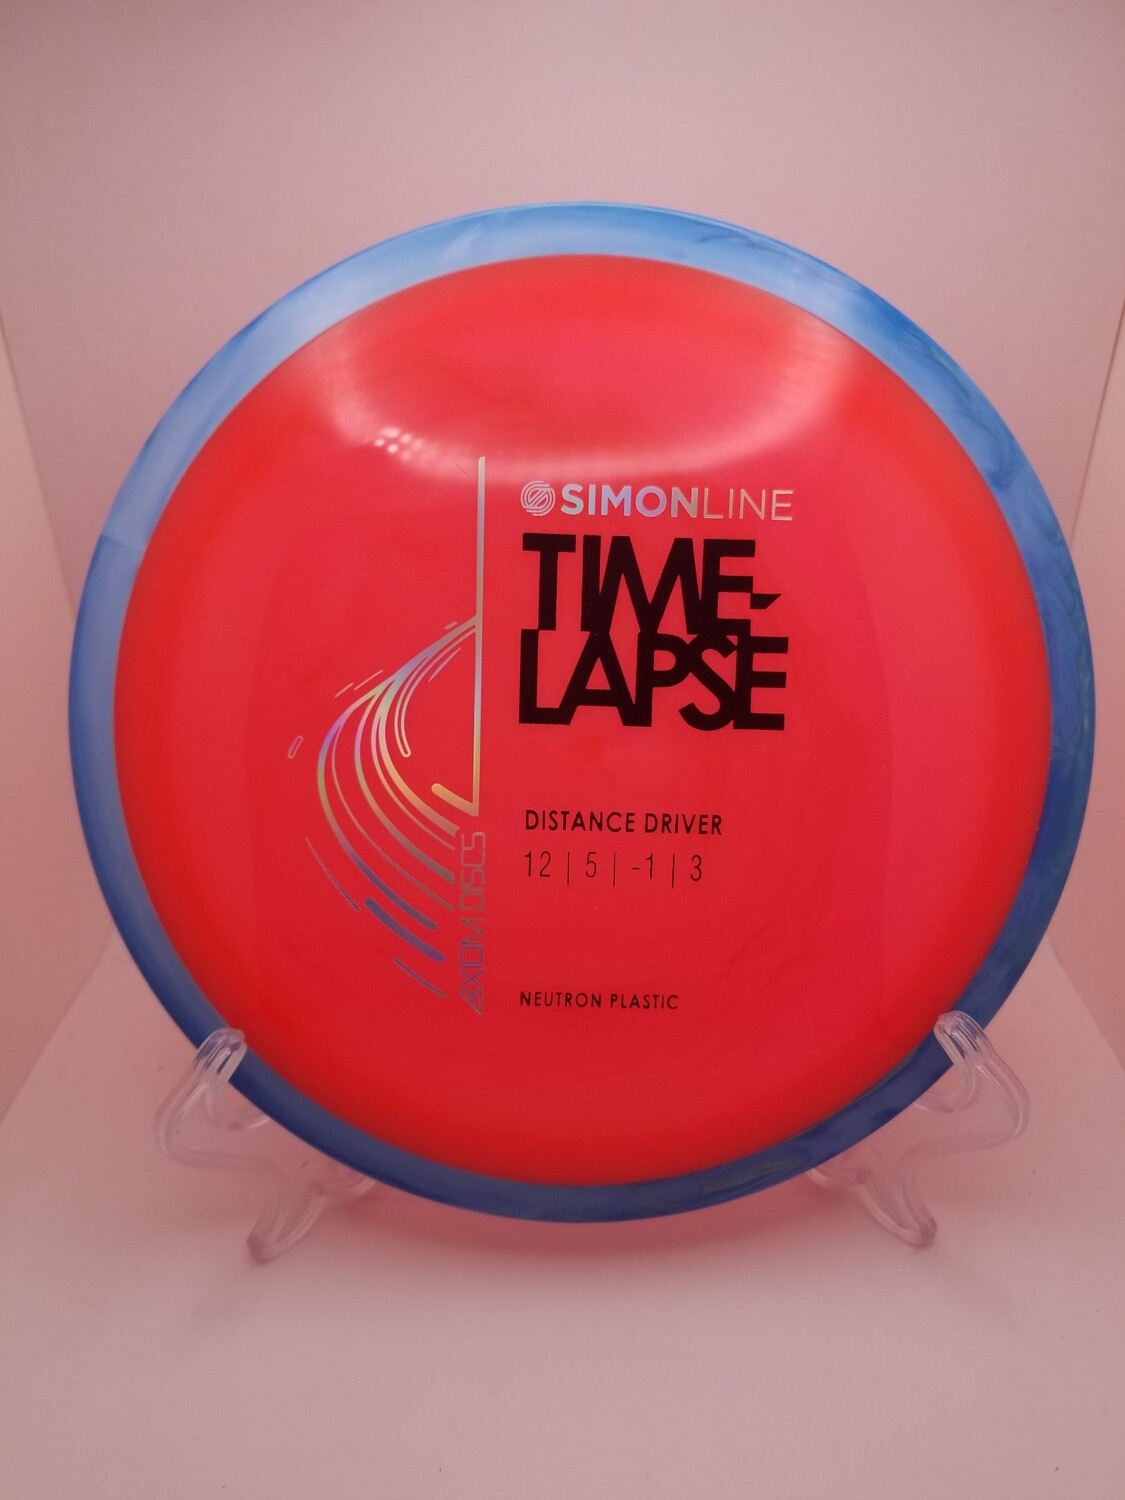 Axiom Discs Simon Line Stock Time Lapse Neutron Watermelon Red Plate with Swirly Teal Blue Rim 174g